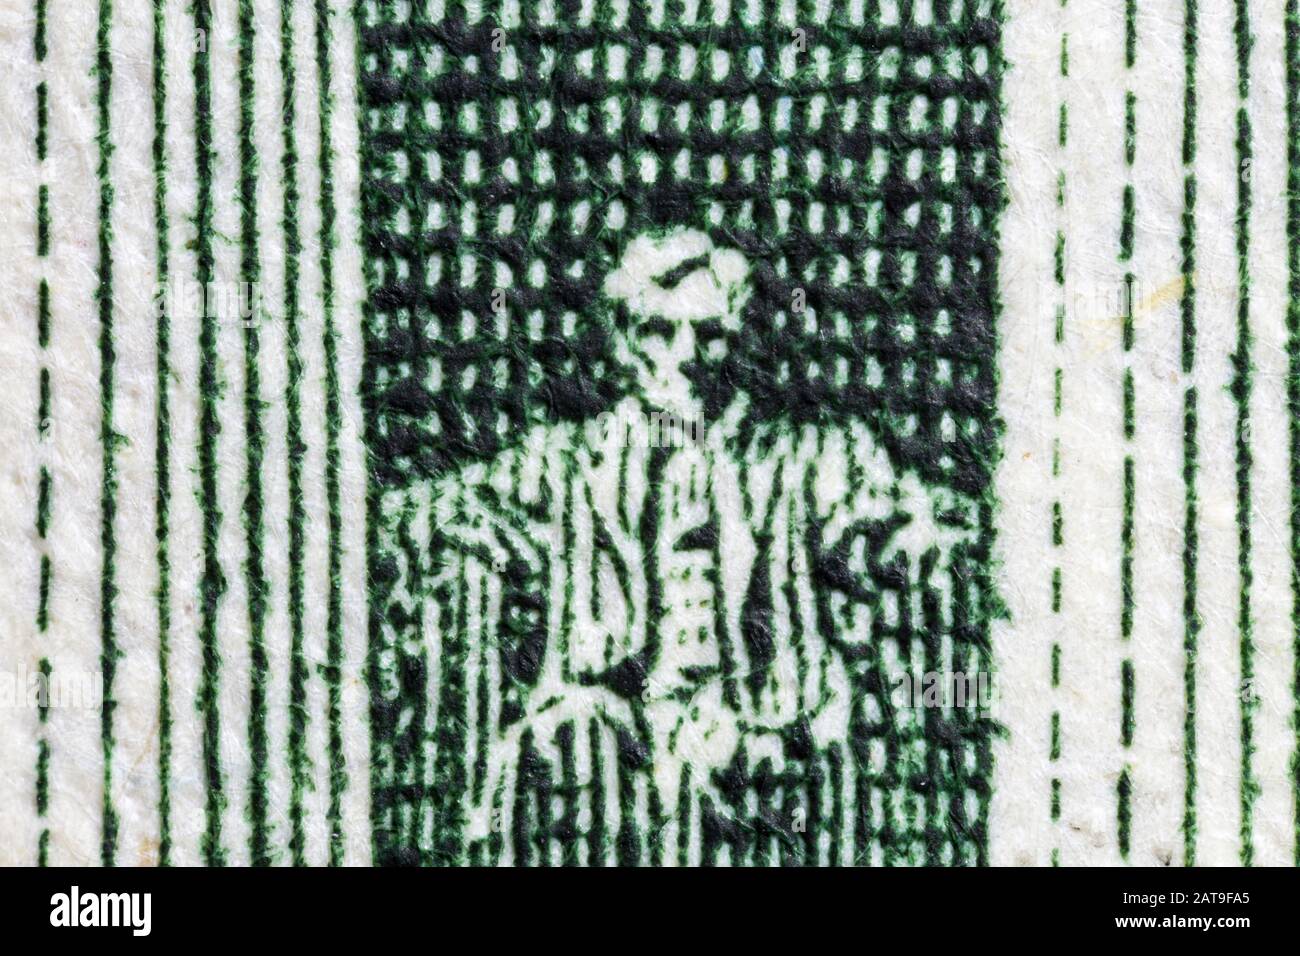 Macro close up photograph of the Abraham Lincoln Memorial on the US Five Dollar Bill. Stock Photo